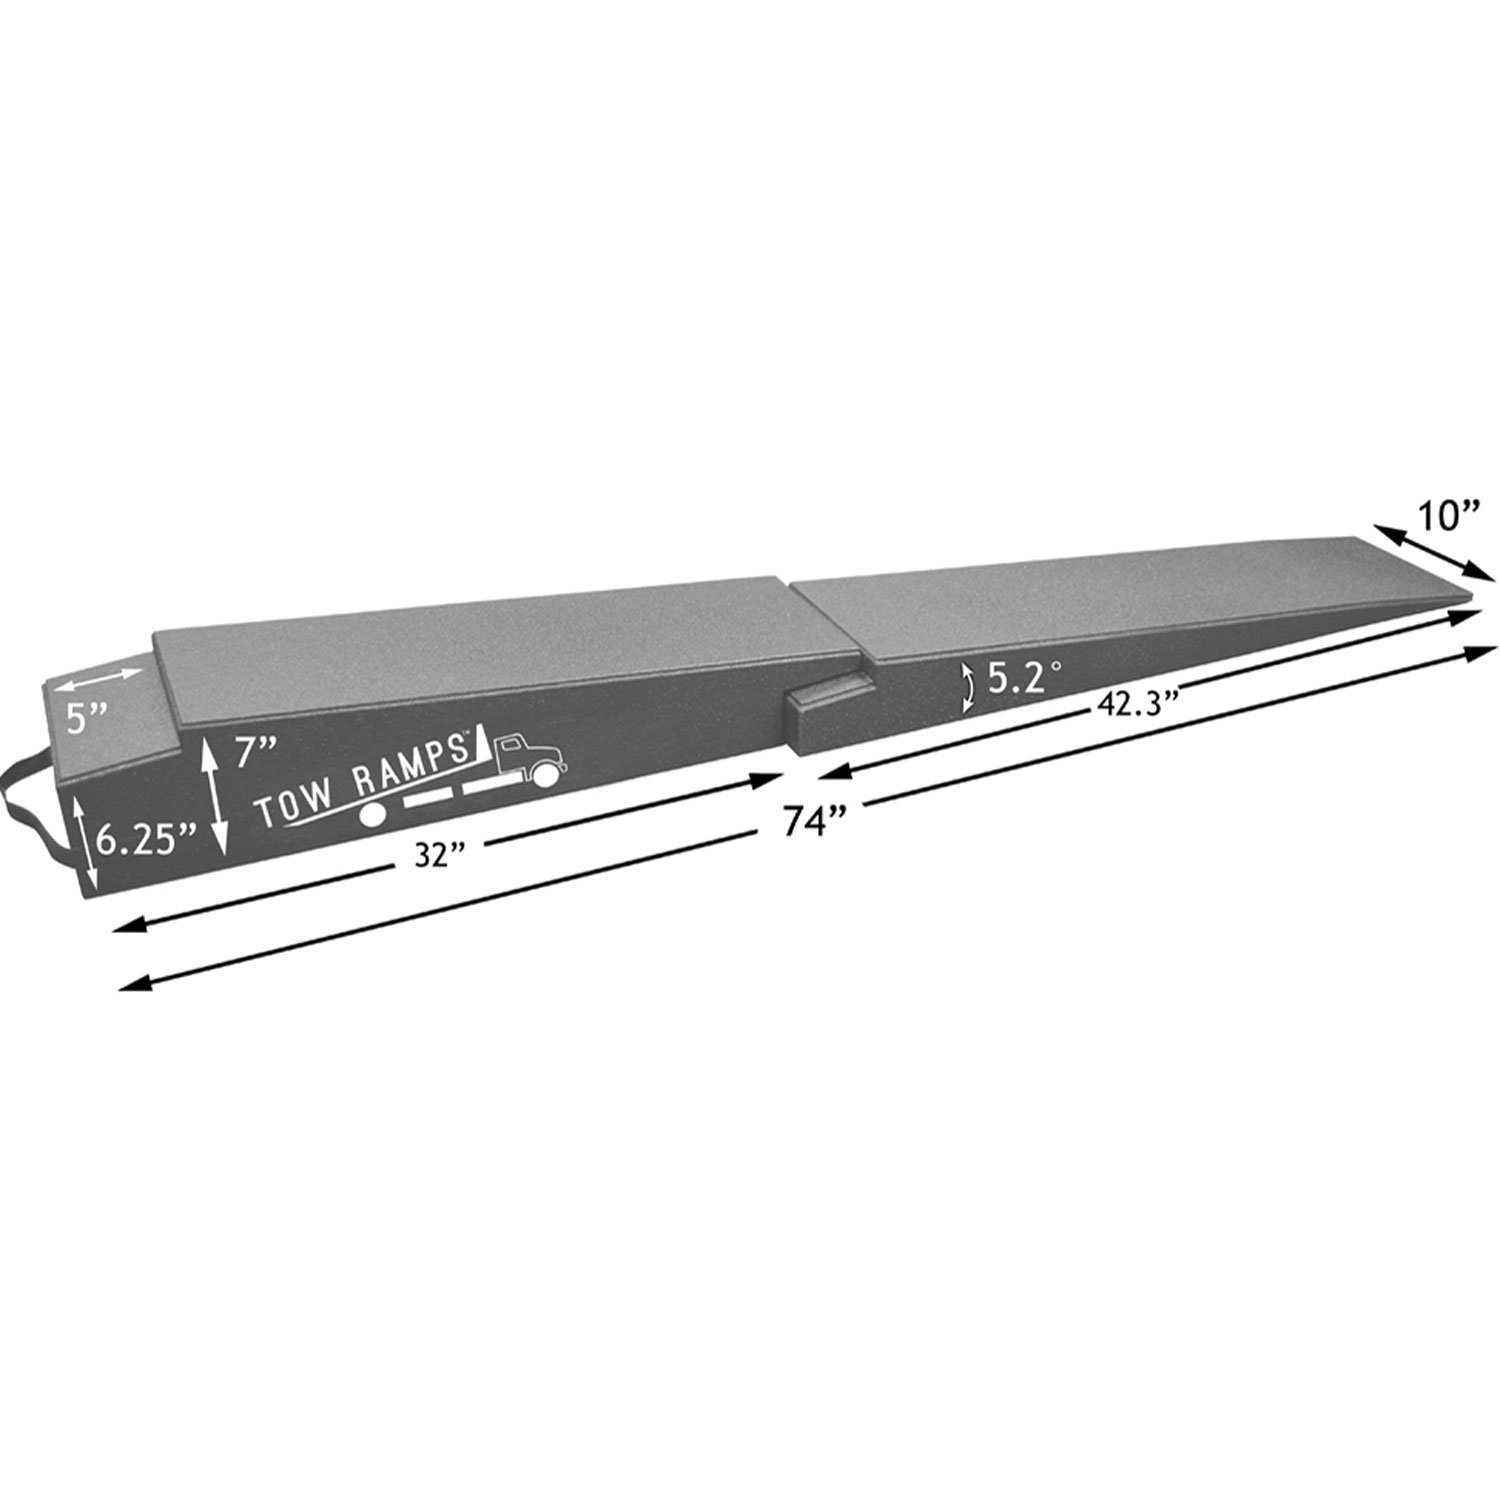 BT-TT-7-10-2 Multi Piece Tow Truck Flatbed Extension Ramps 74 in. Long